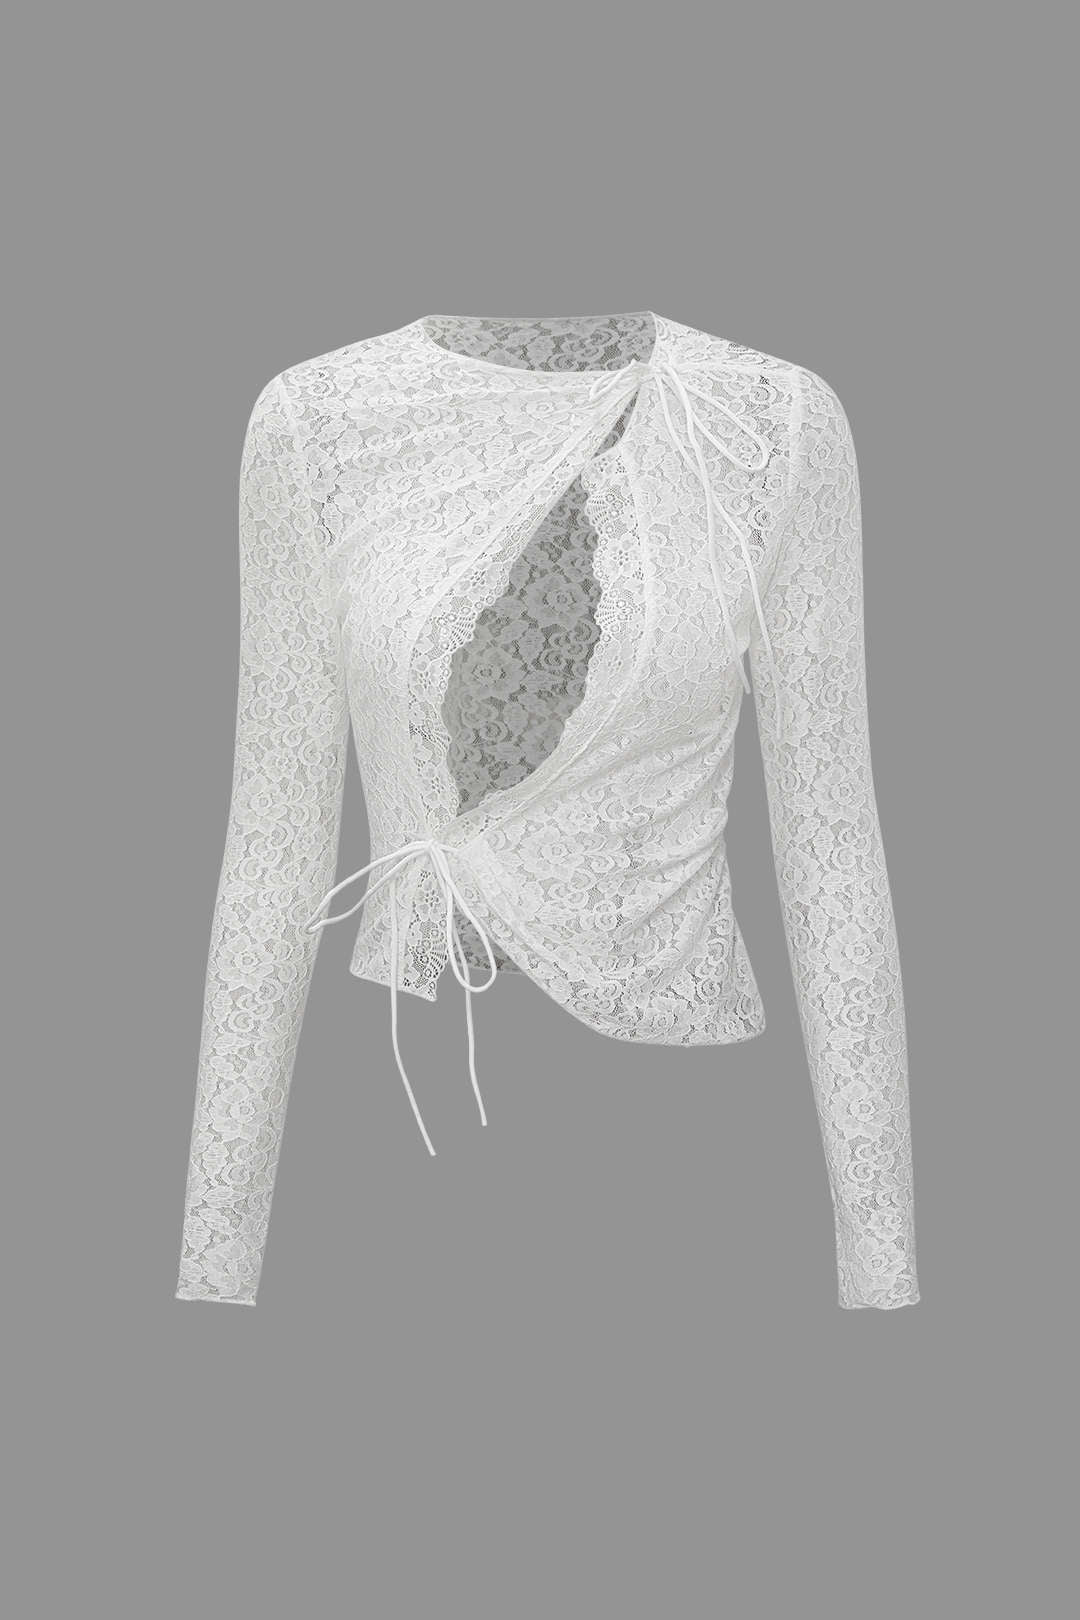 Sheer Lace Cut Out Long Sleeve Top